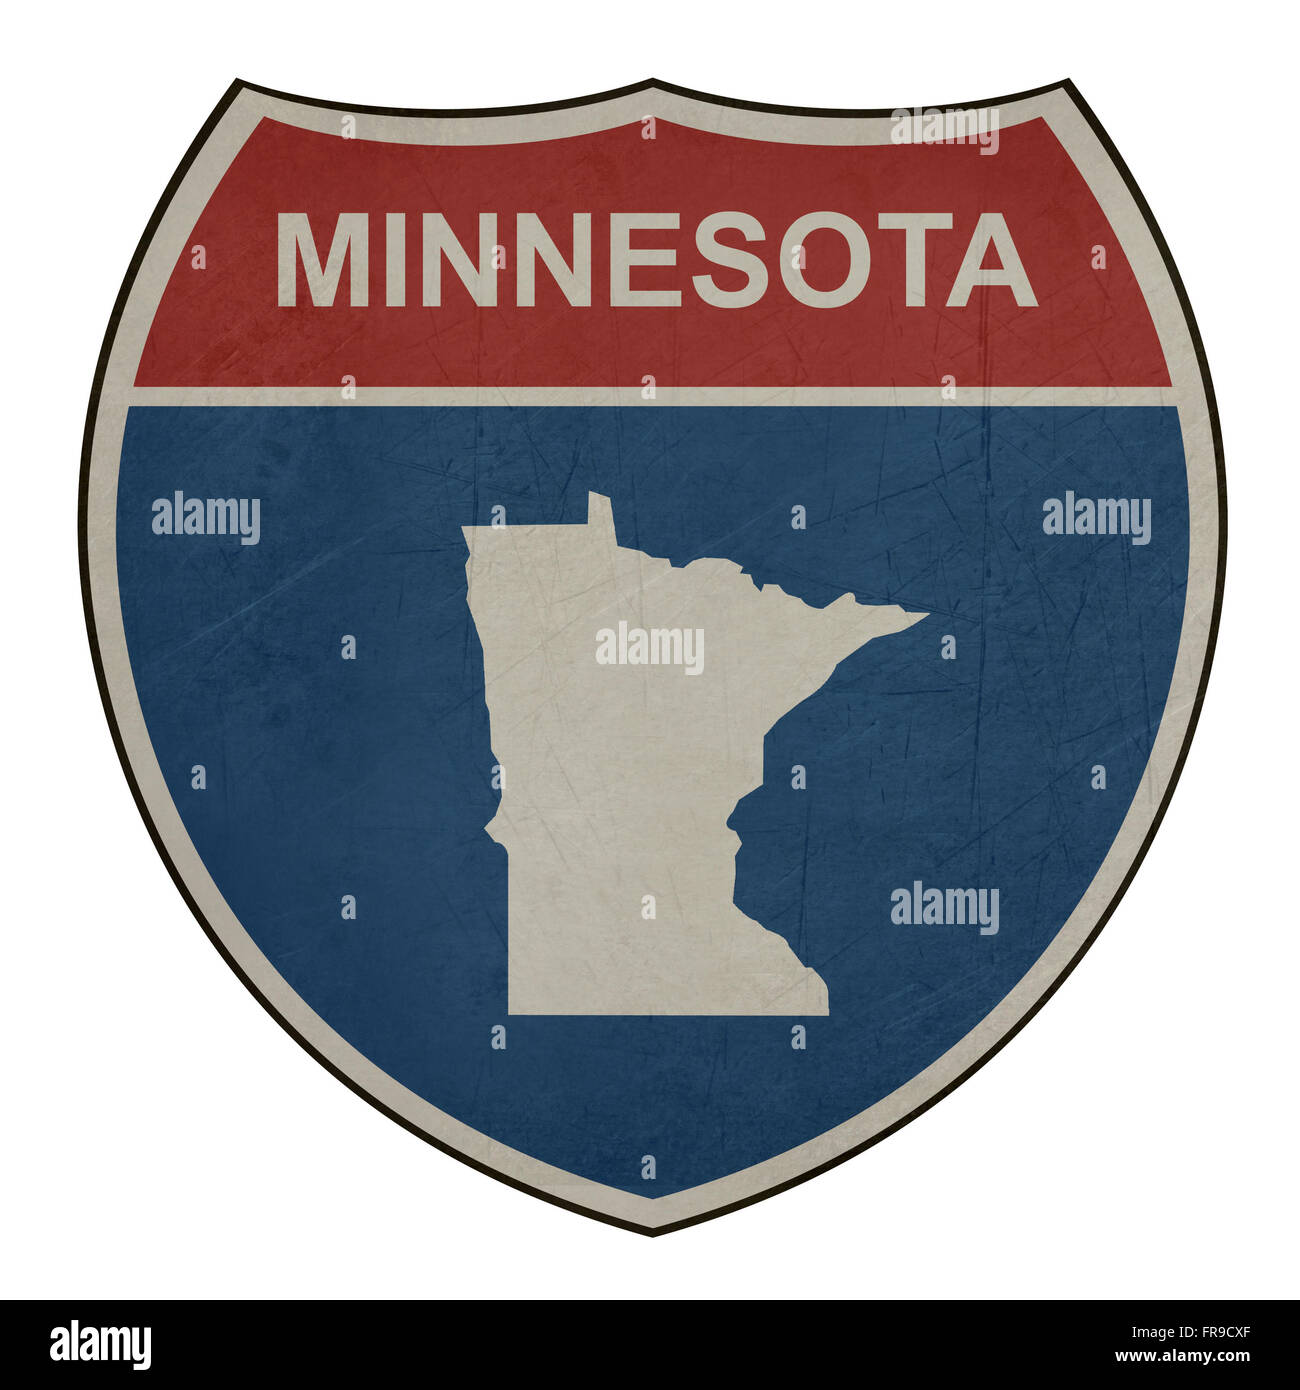 Grunge Minnesota American interstate highway road shield isolated on a white background. Stock Photo